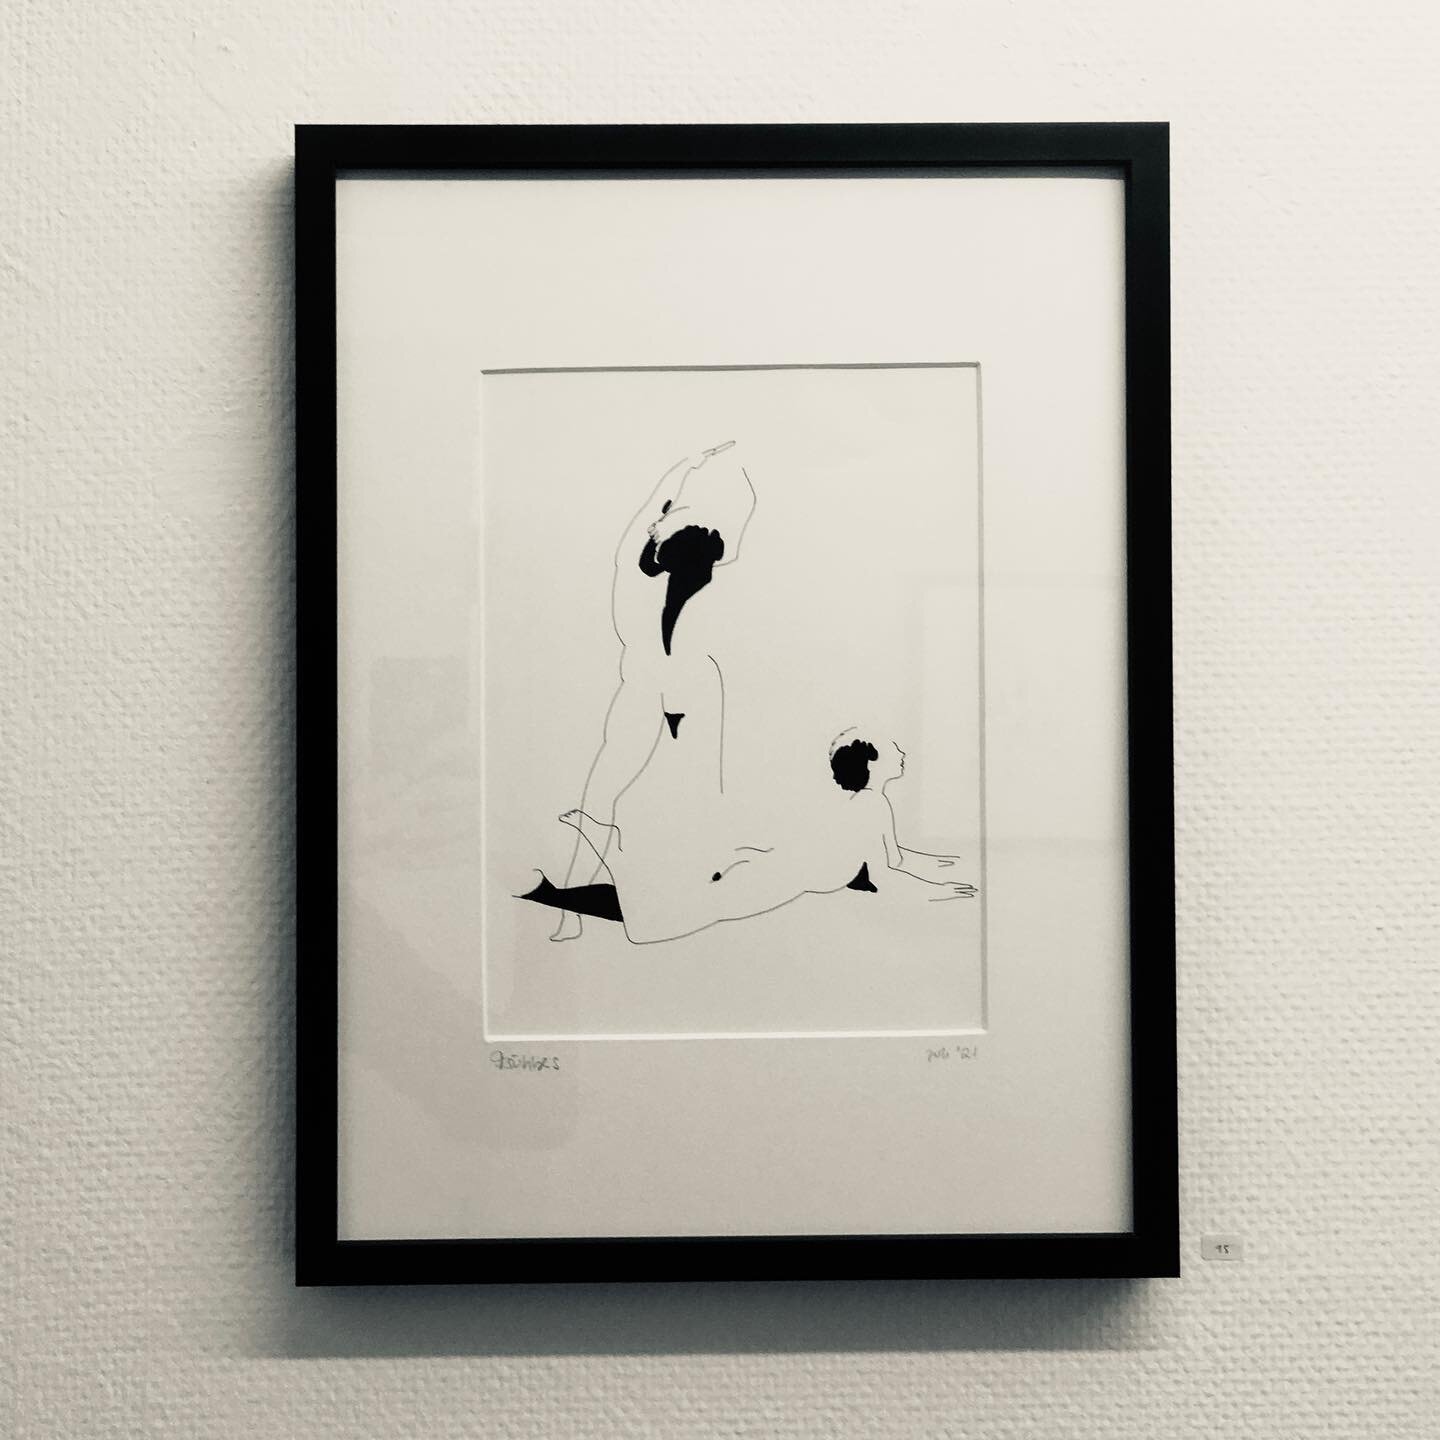 Close ups from my works hanging at @eckegalerie at the moment. &bdquo;Bodies - 10 positions&ldquo; is up for another week. If you are interested in one of the artworks, drop me or the gallery a message 📮